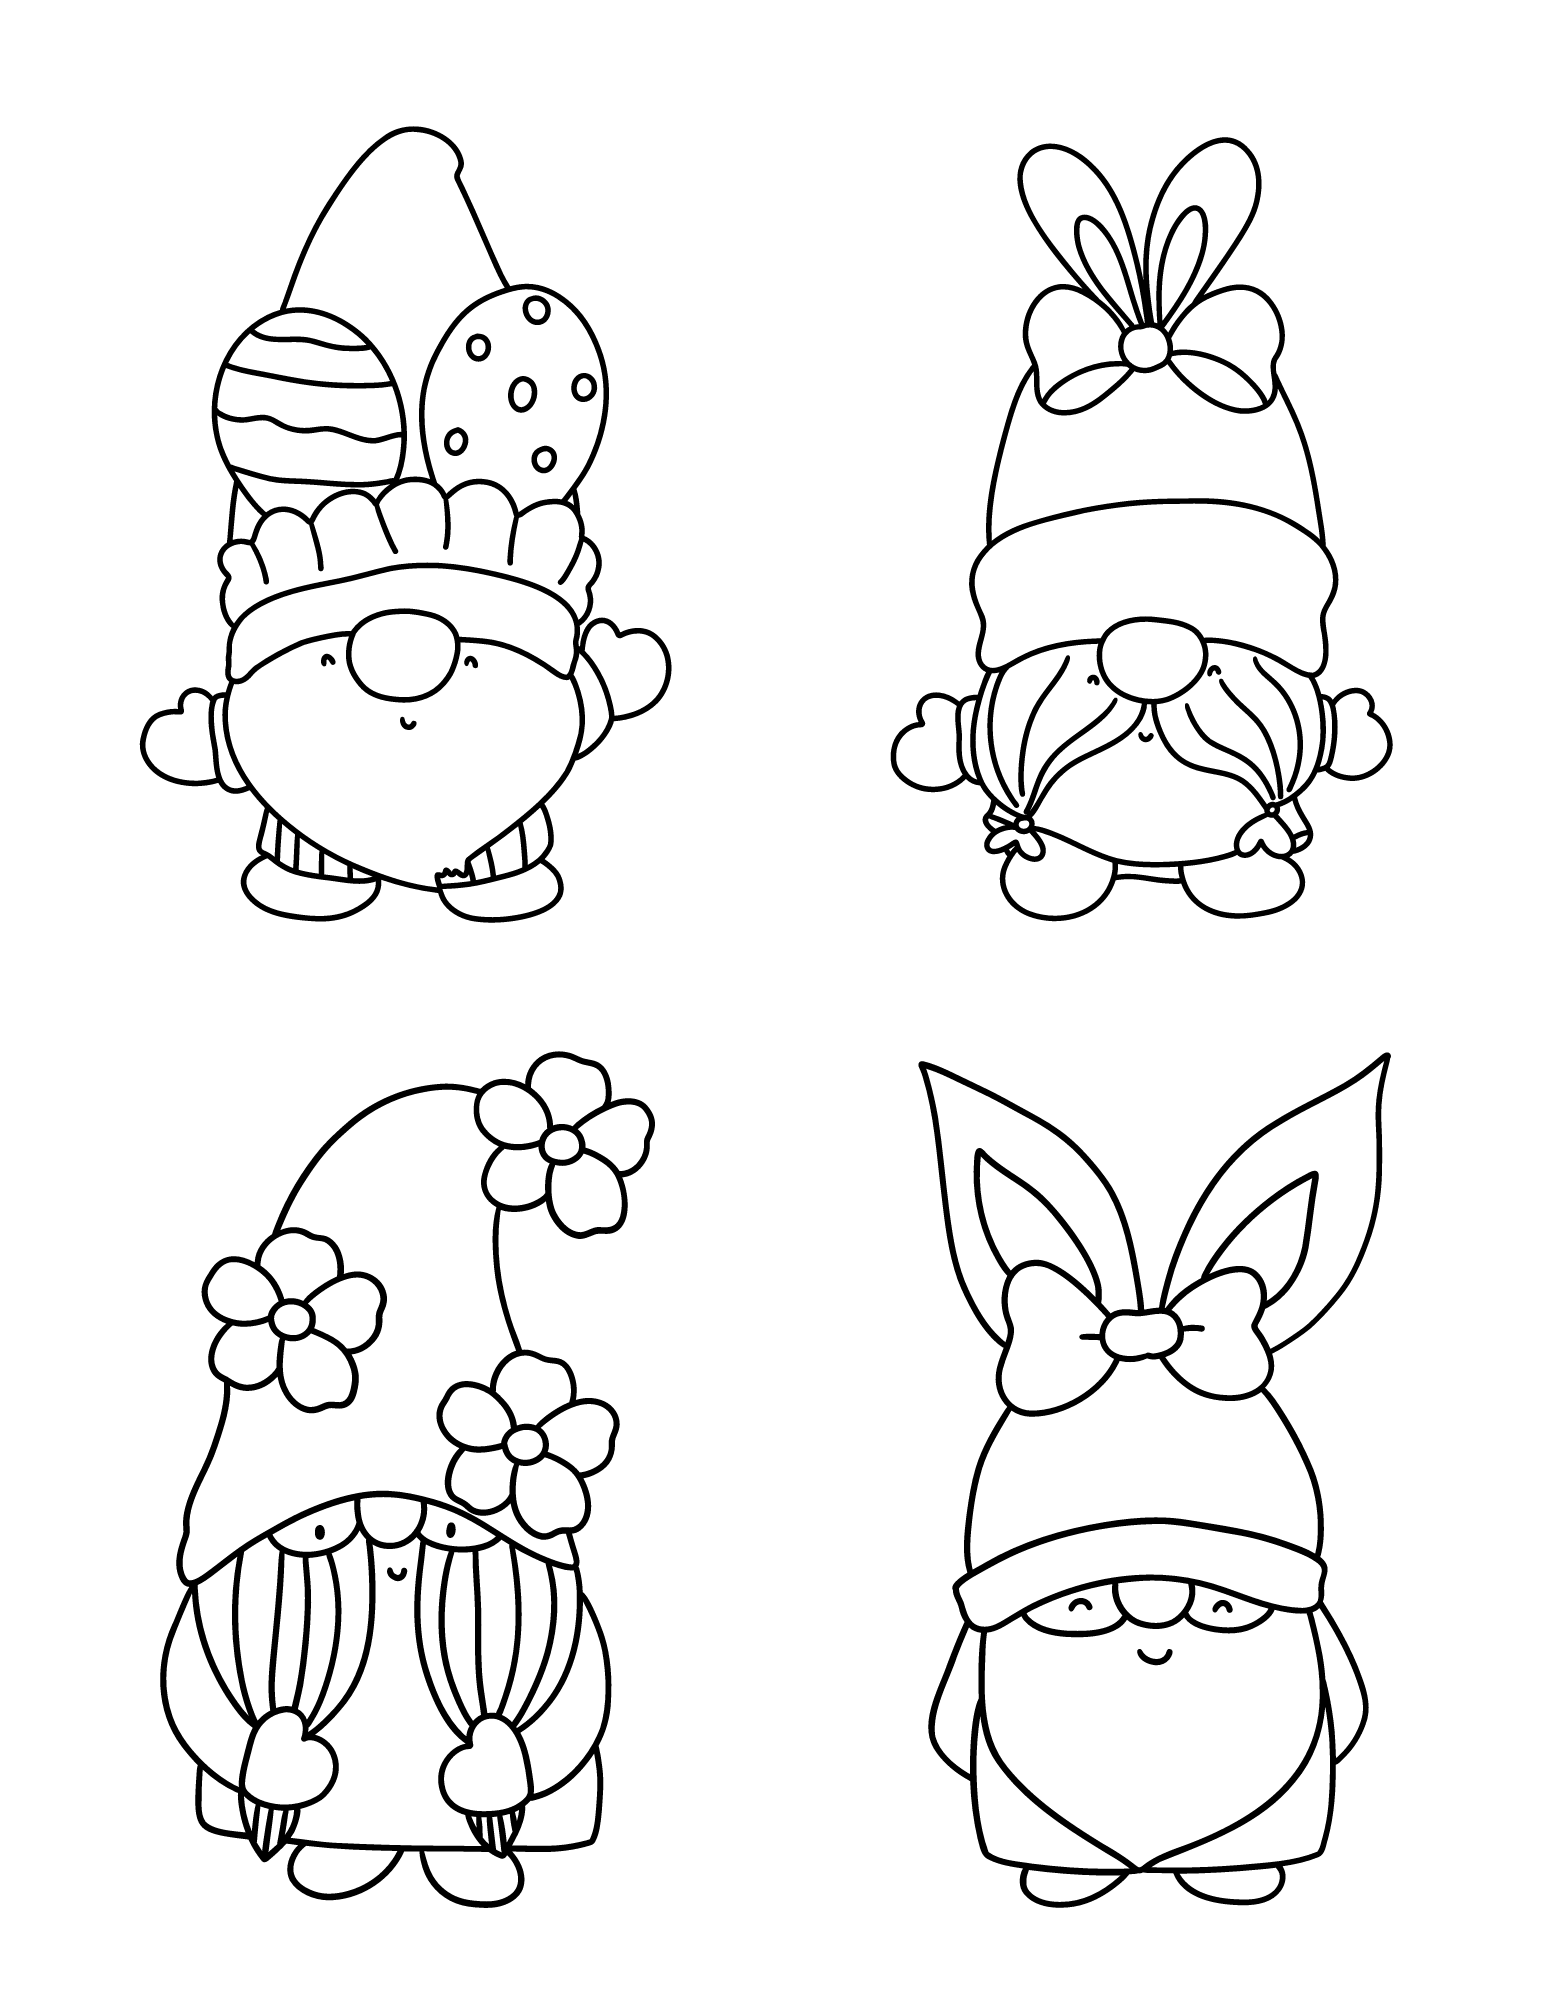 Celebrate the ing season with these fun spring gnomes coloring pages